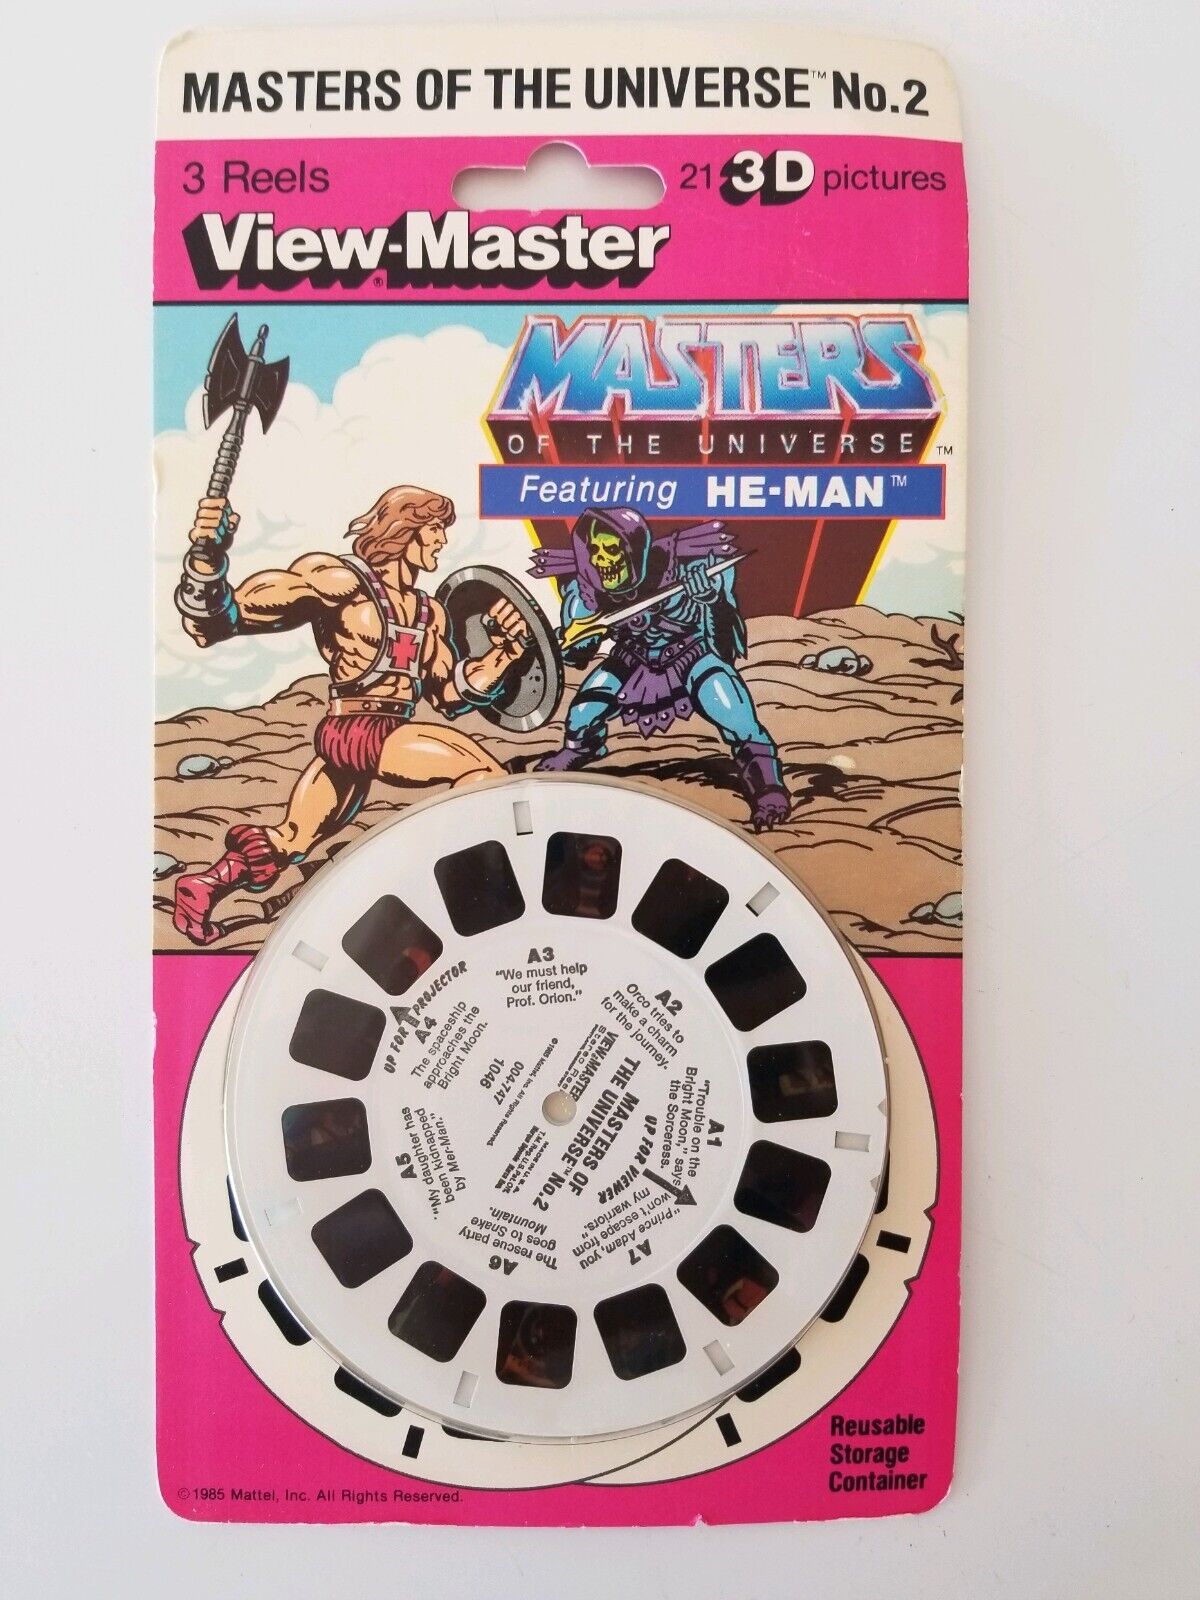 Rare New , Unopened Viewmaster Masters of the Universe 3D Reel No. 2 1985 